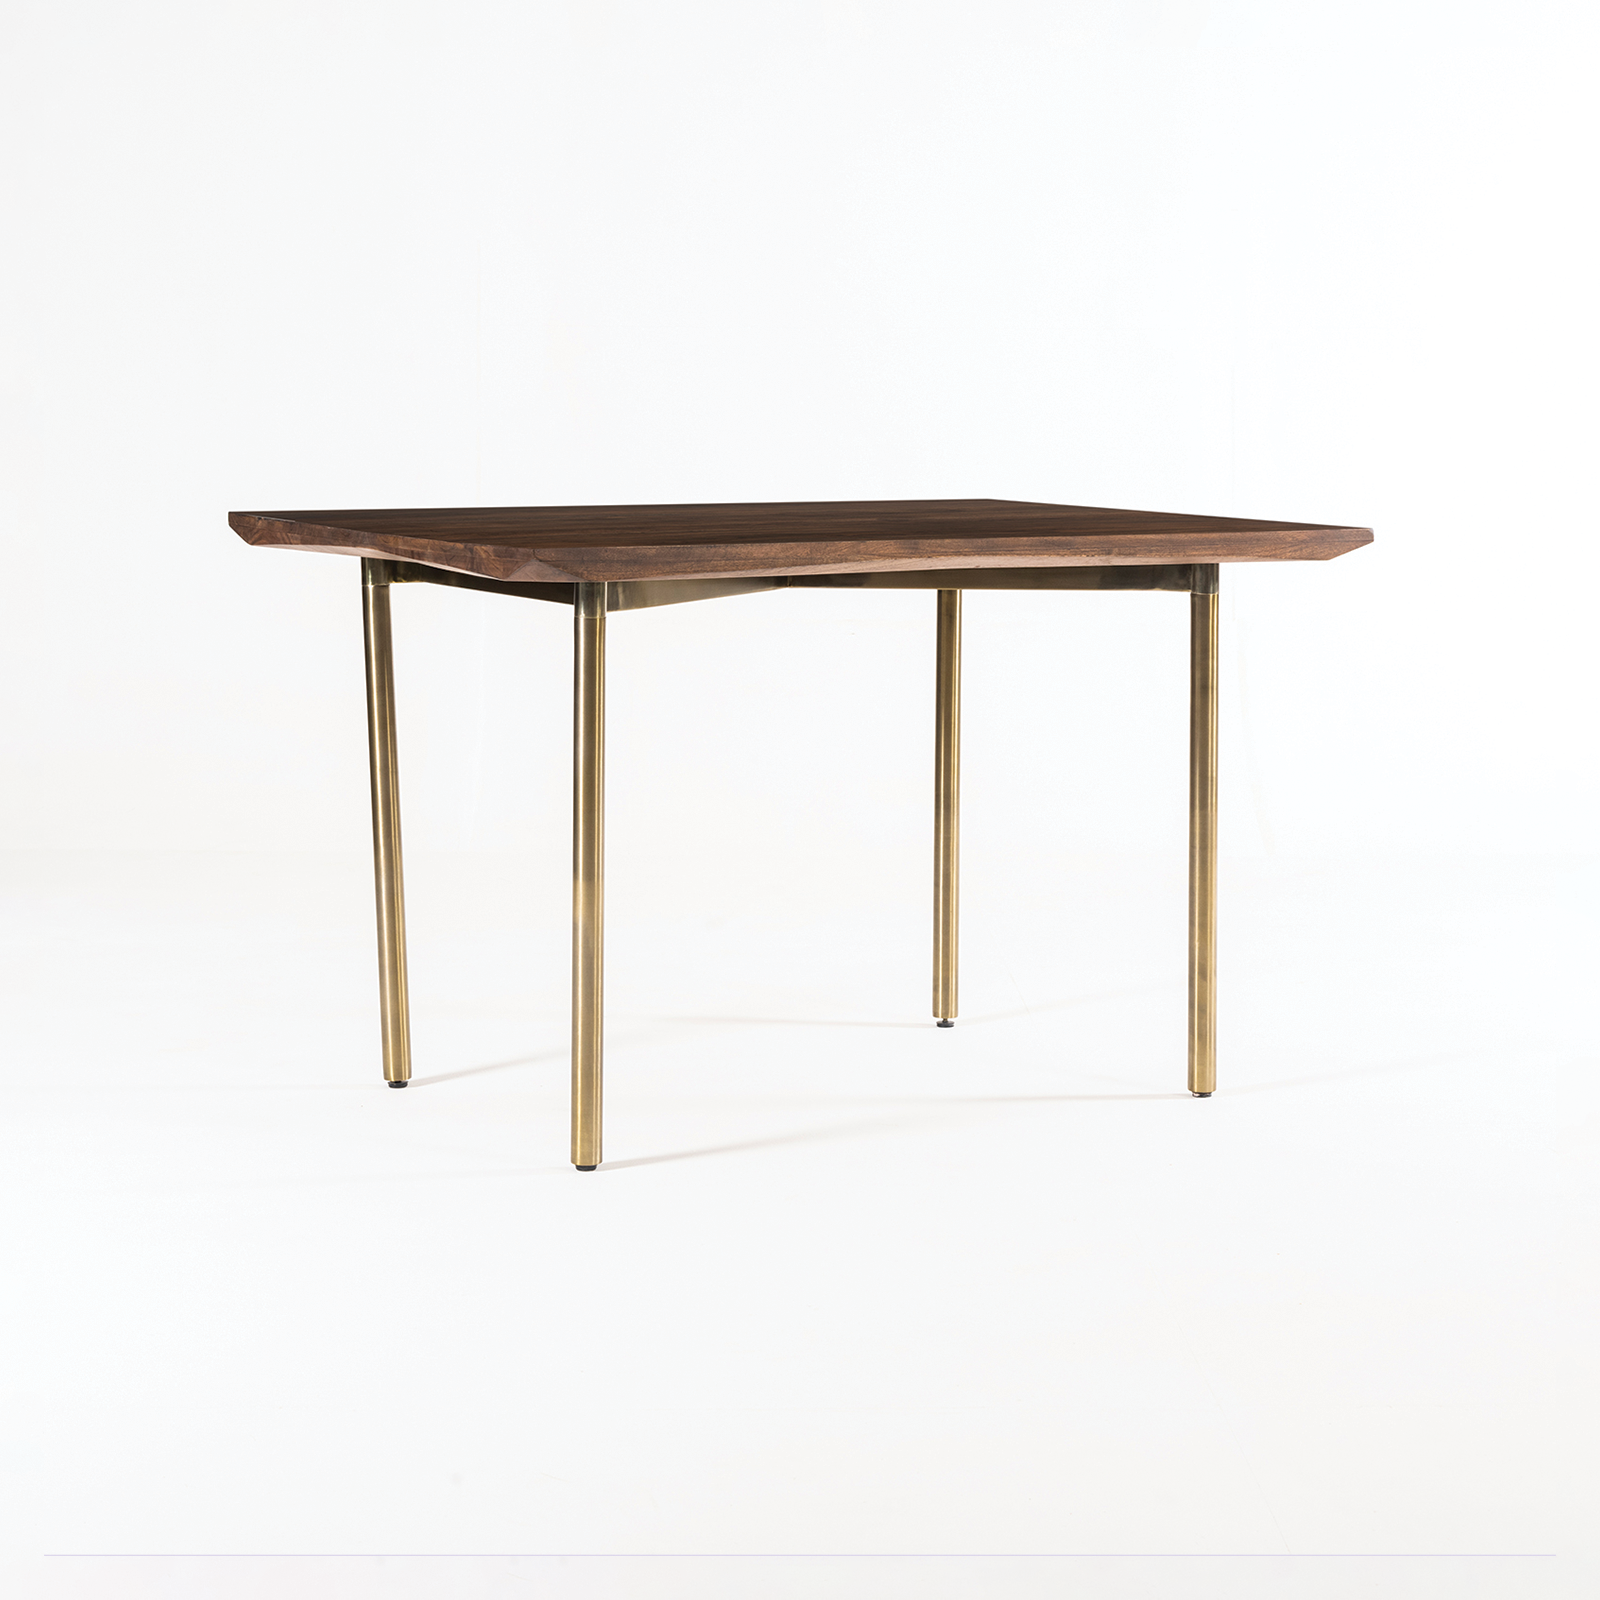 Barcelona Dining Table 4 Seater